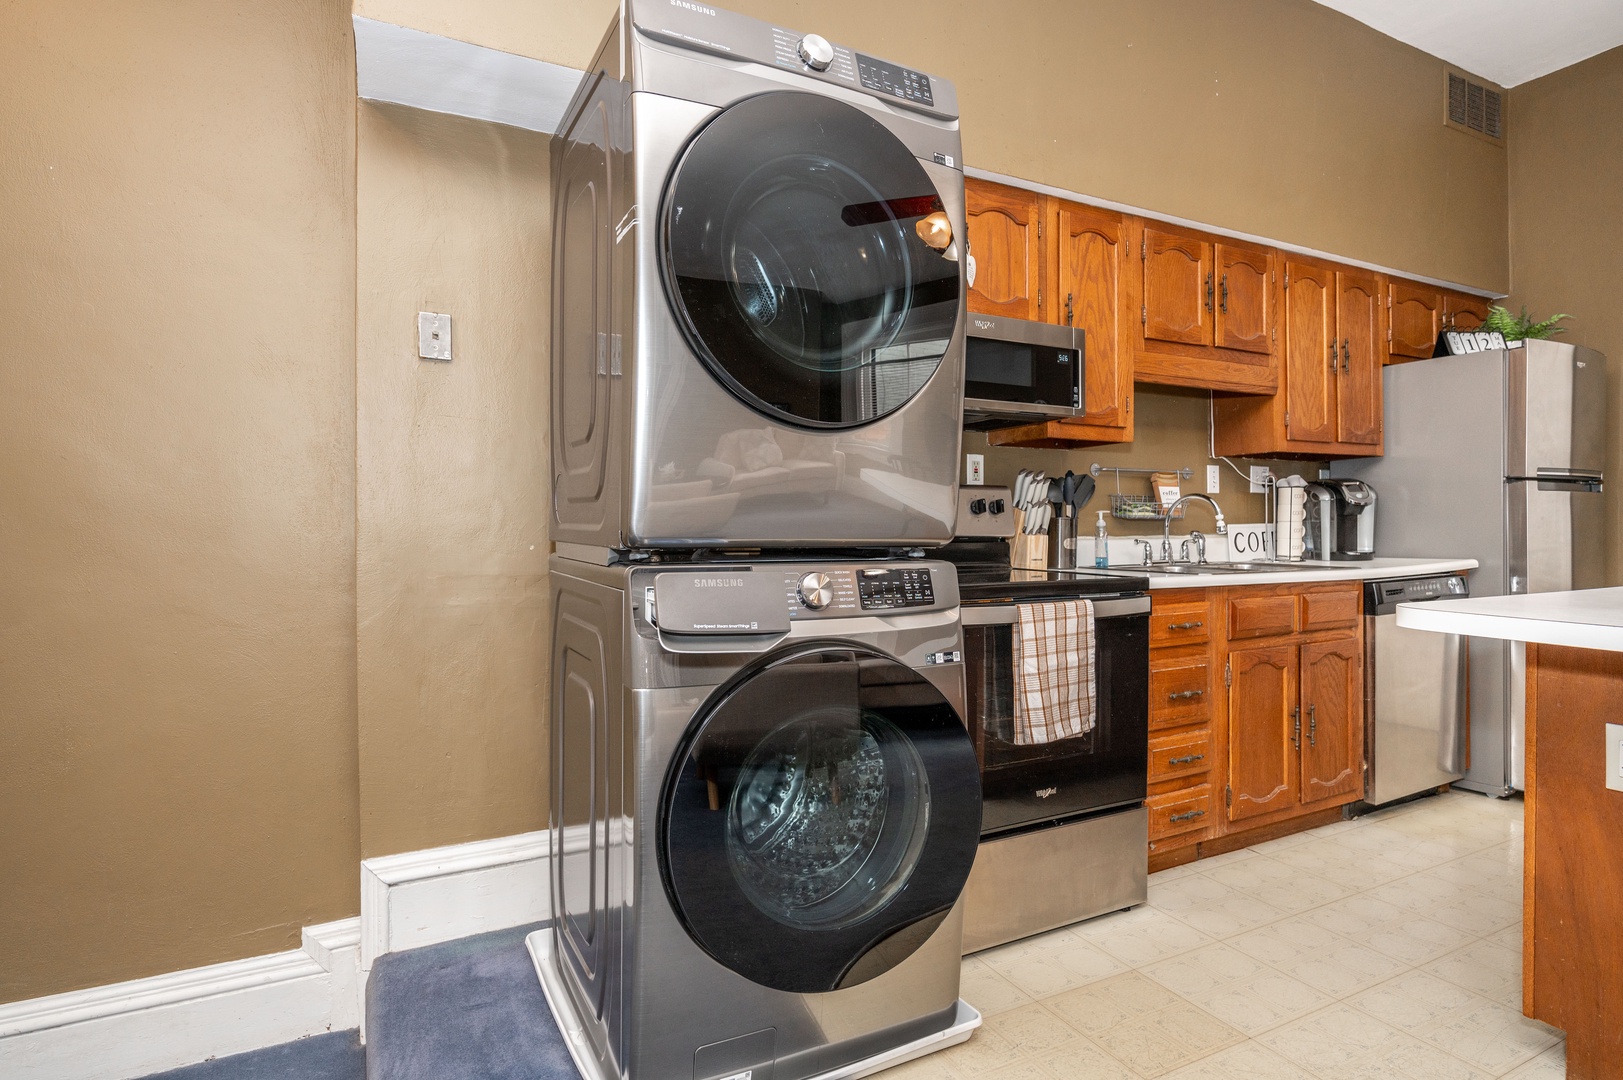 Make use of the private washer and dryer for added convenience